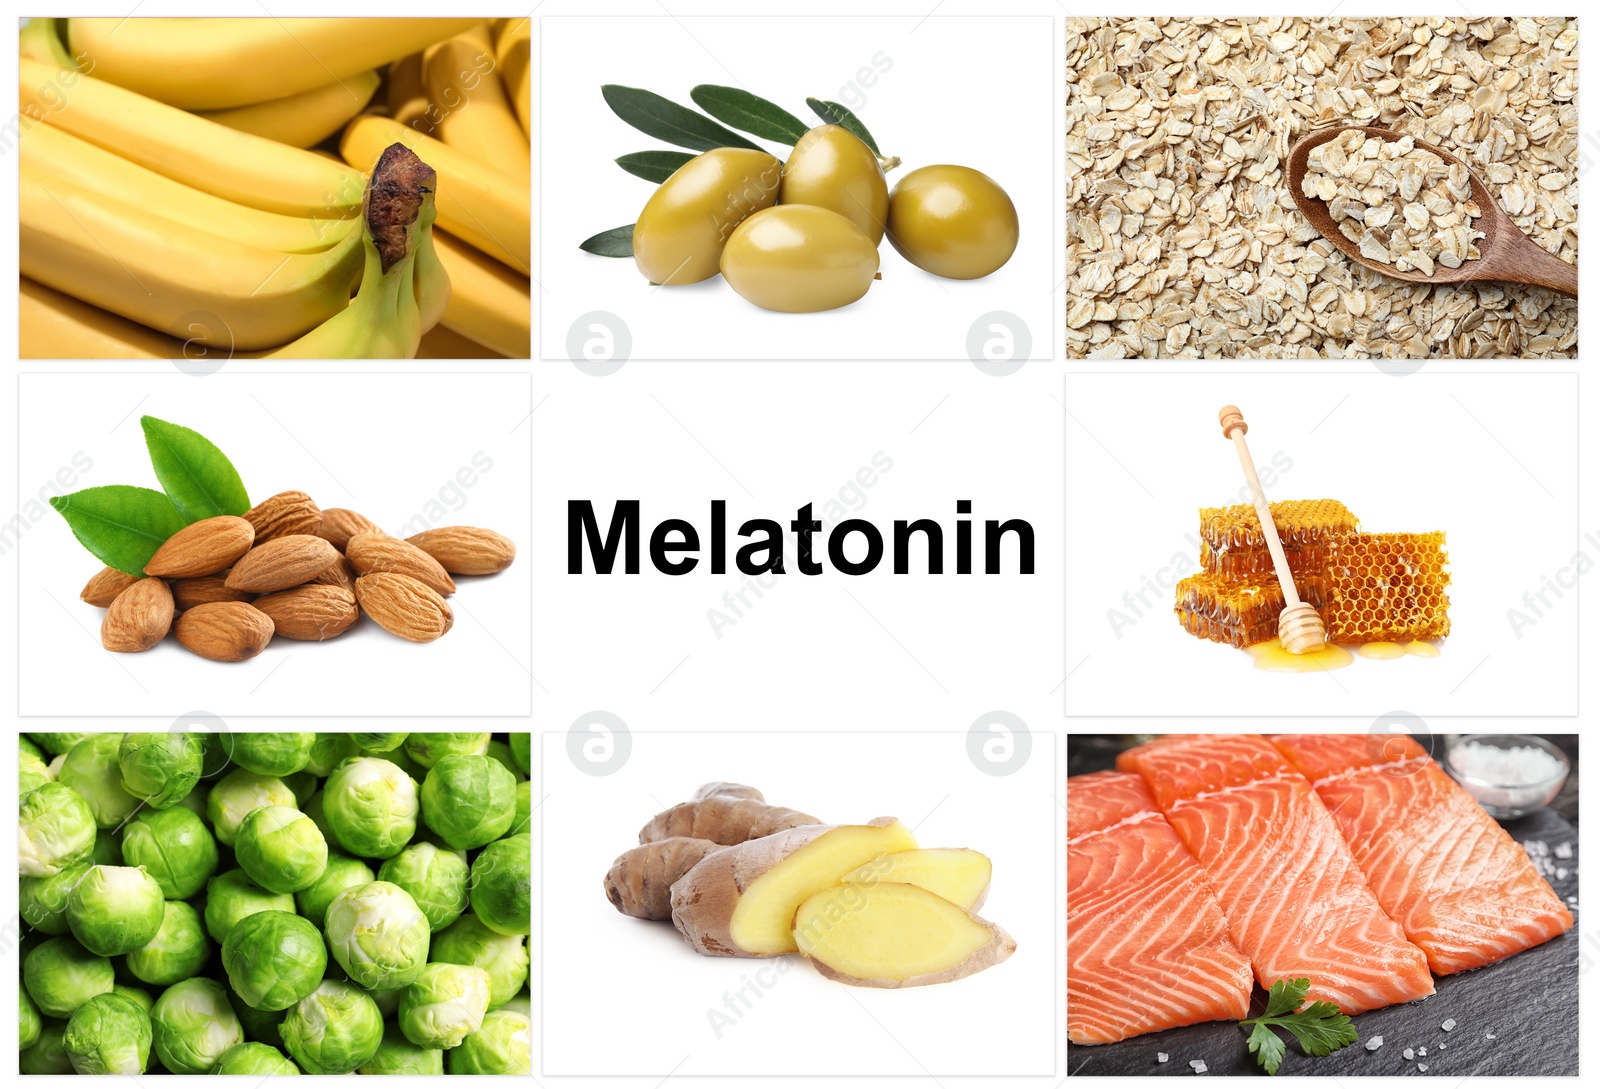 Image of Different foods rich in melatonin that can help you sleep. Different tasty products on white background